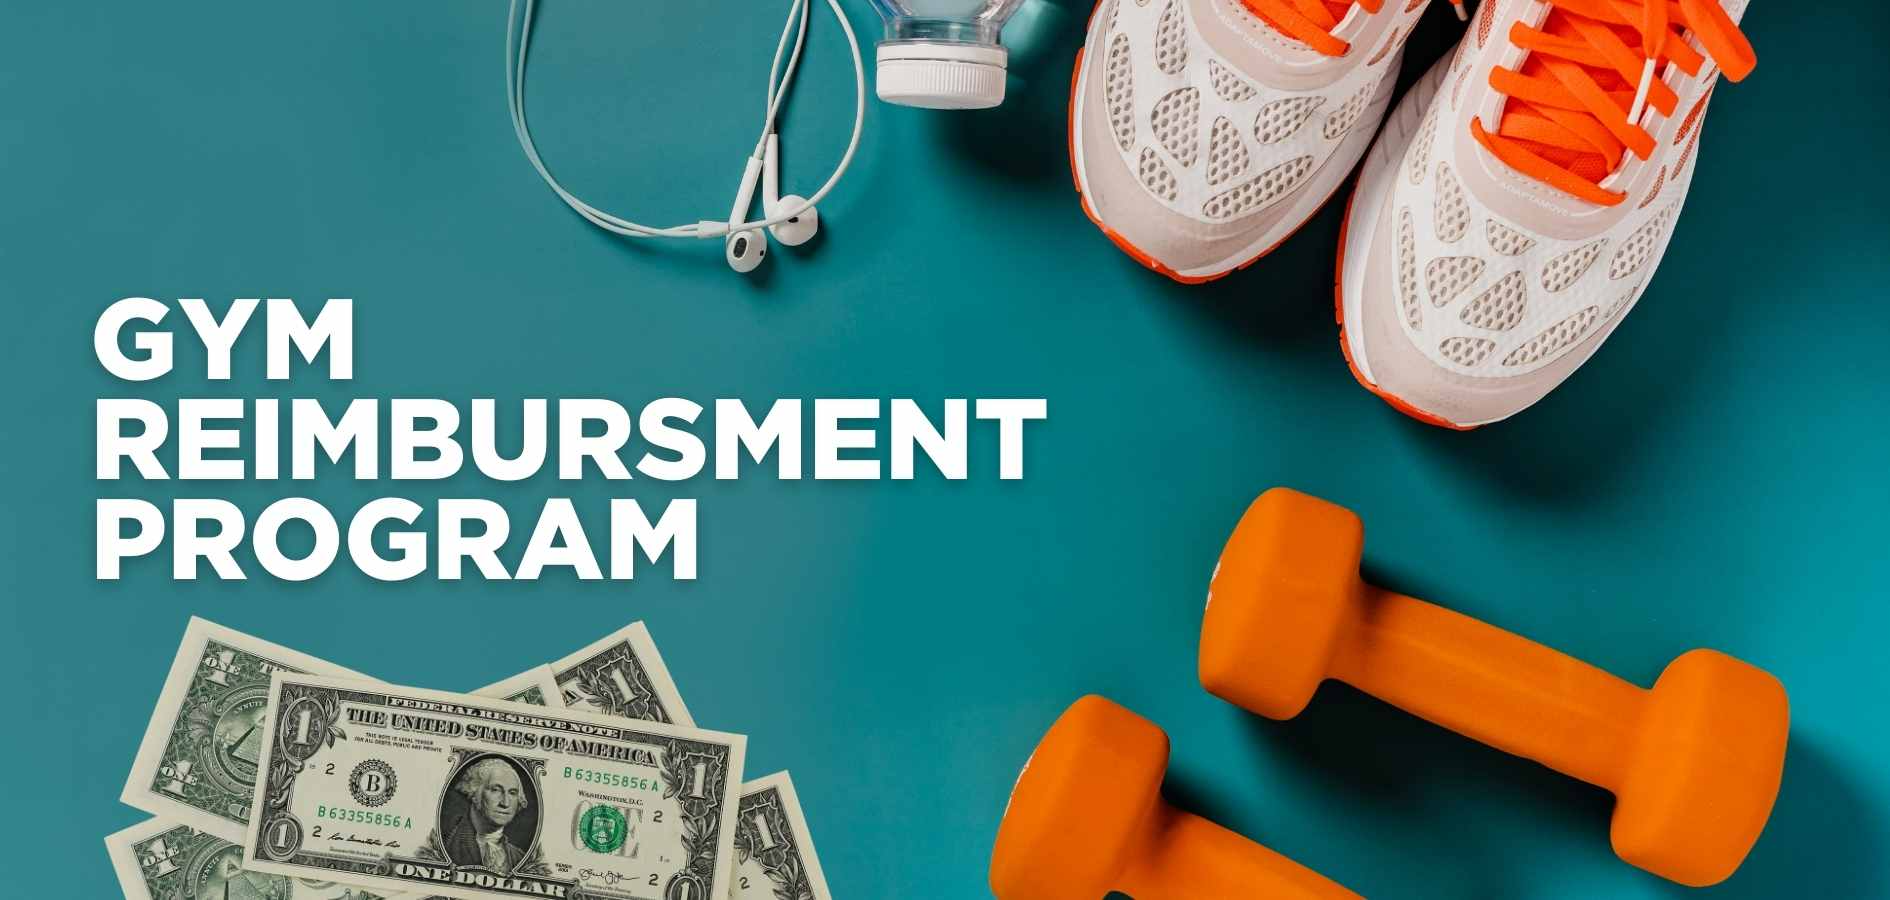 Featured image for “Submit your Gym Reimbursement”